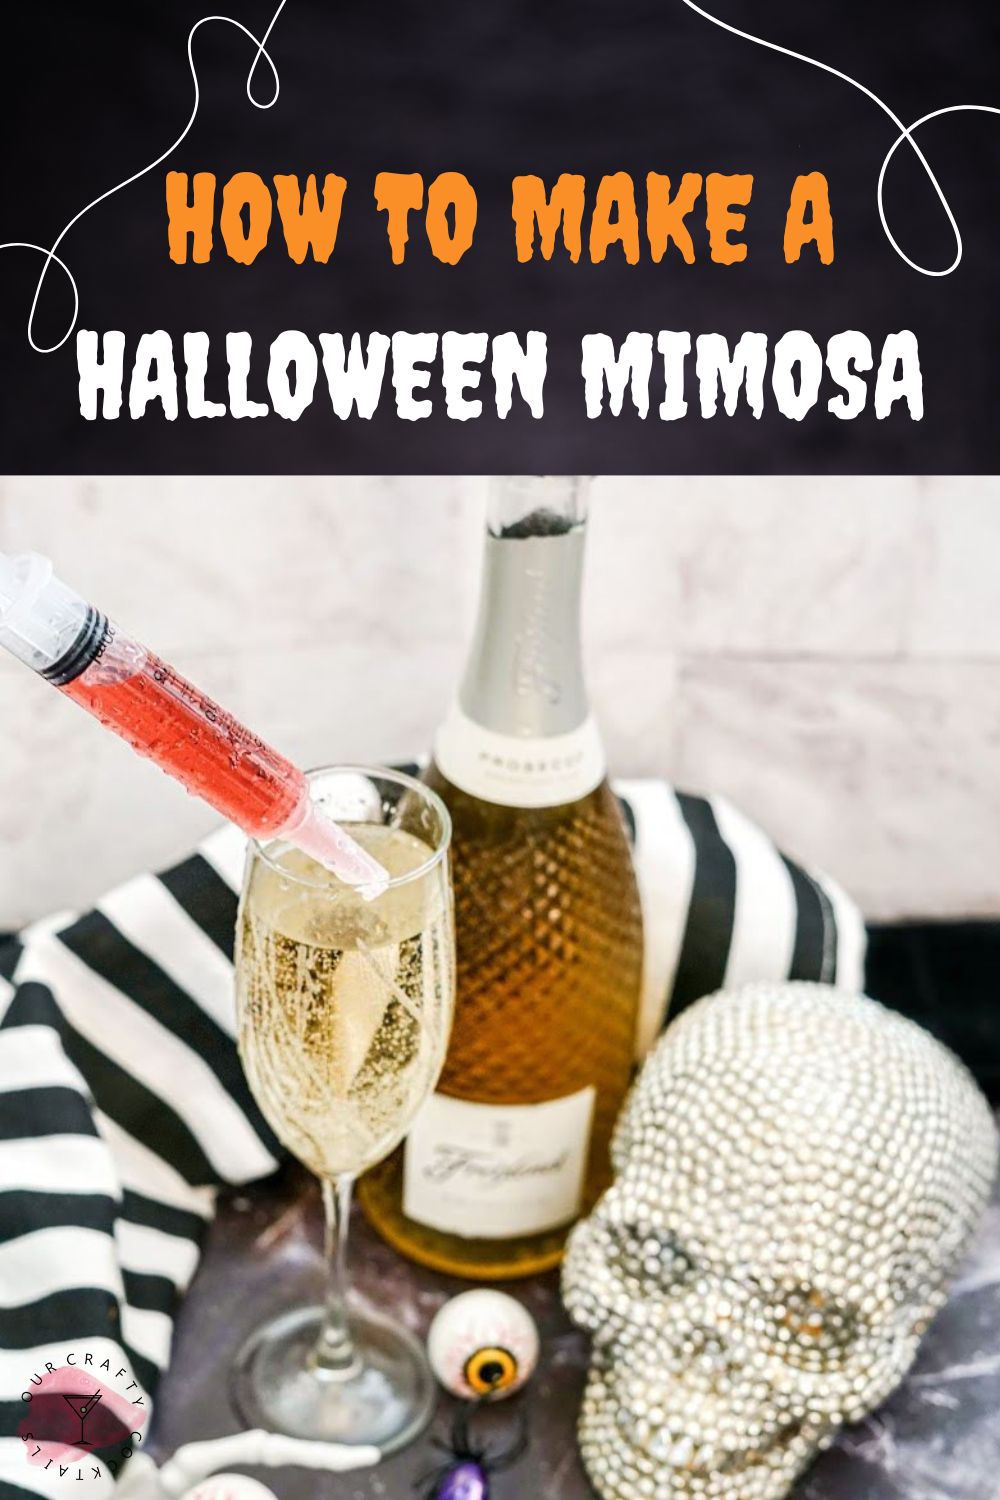 Halloween mimosa pin with text